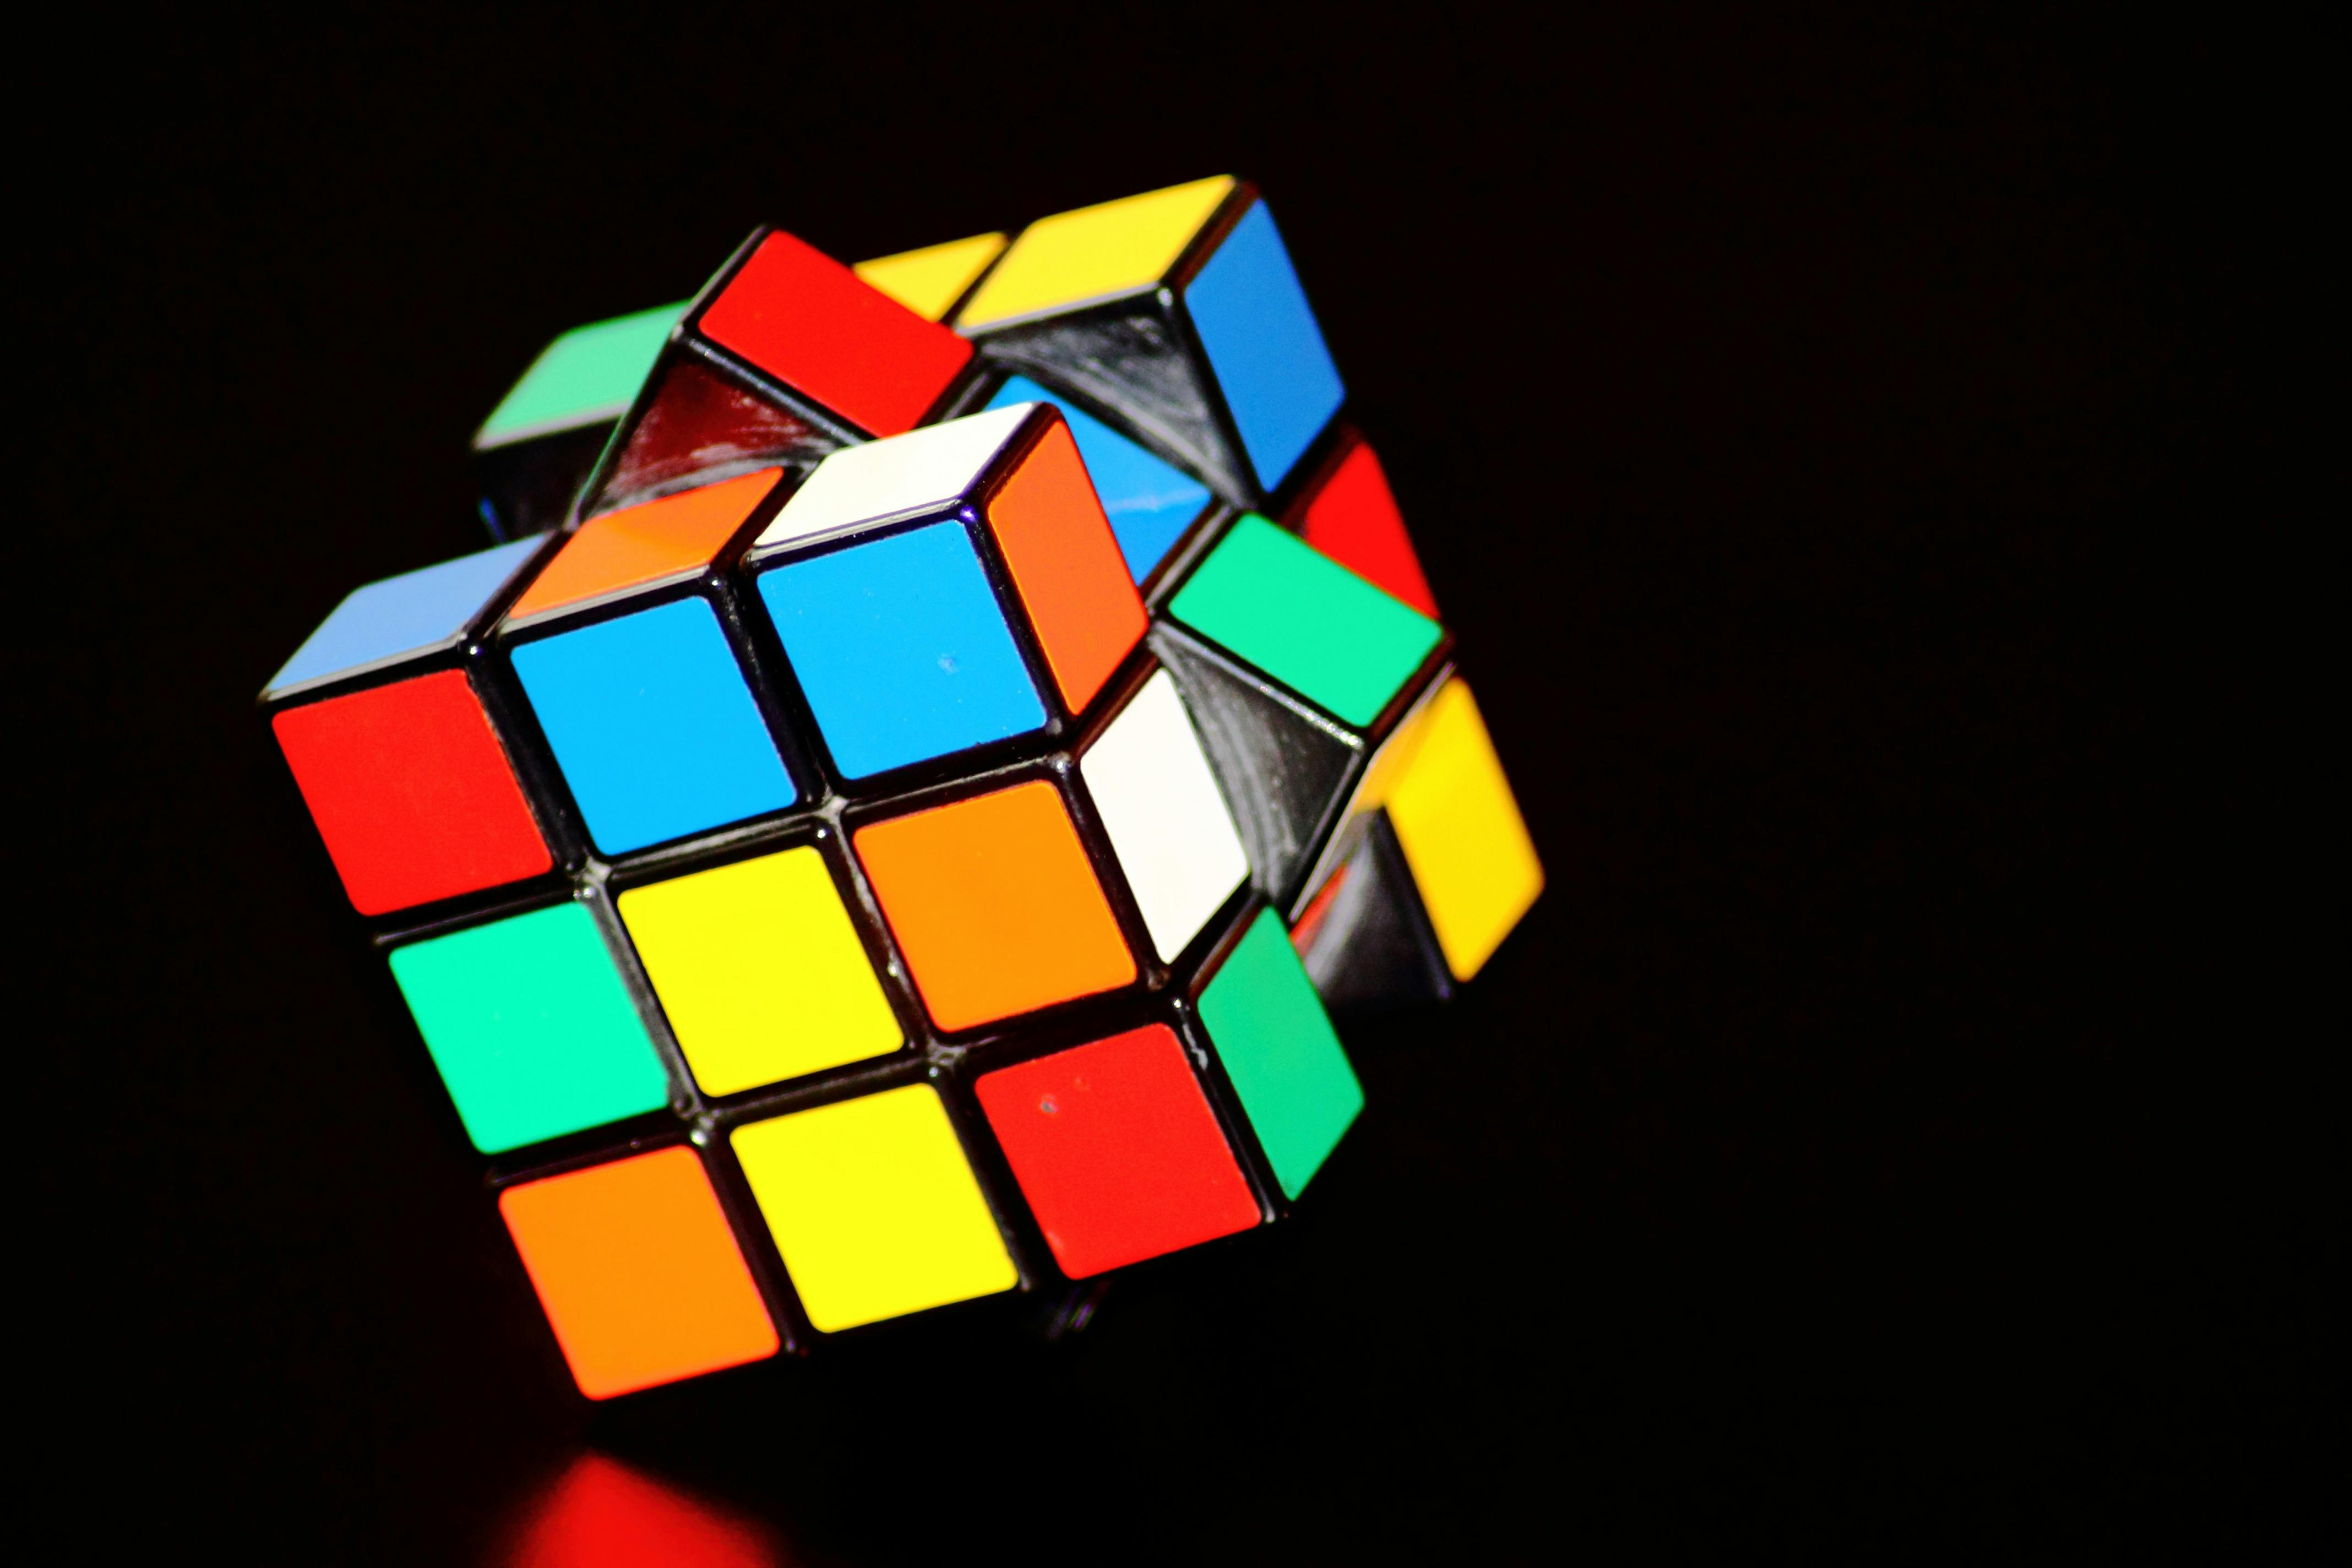 Rubik's Cube Images | Free Photos, PNG Stickers, Wallpapers & Backgrounds -  rawpixel